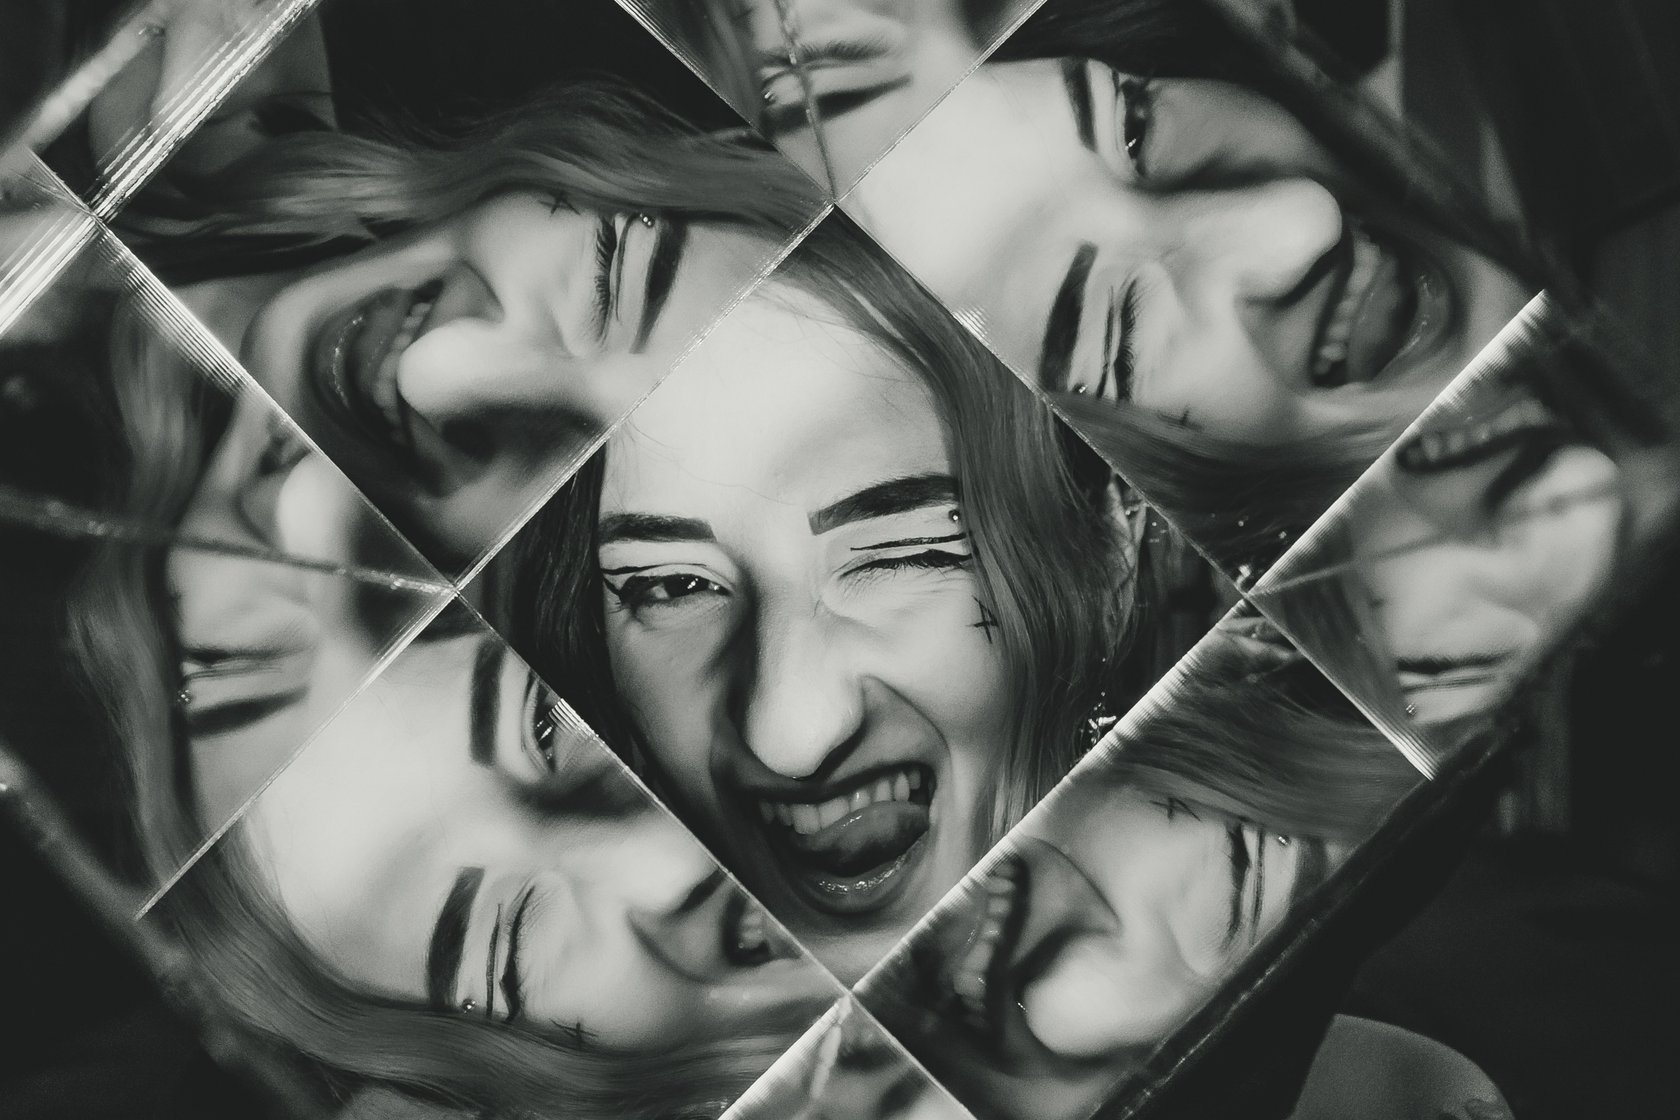 repeated reflection photography with mirrors